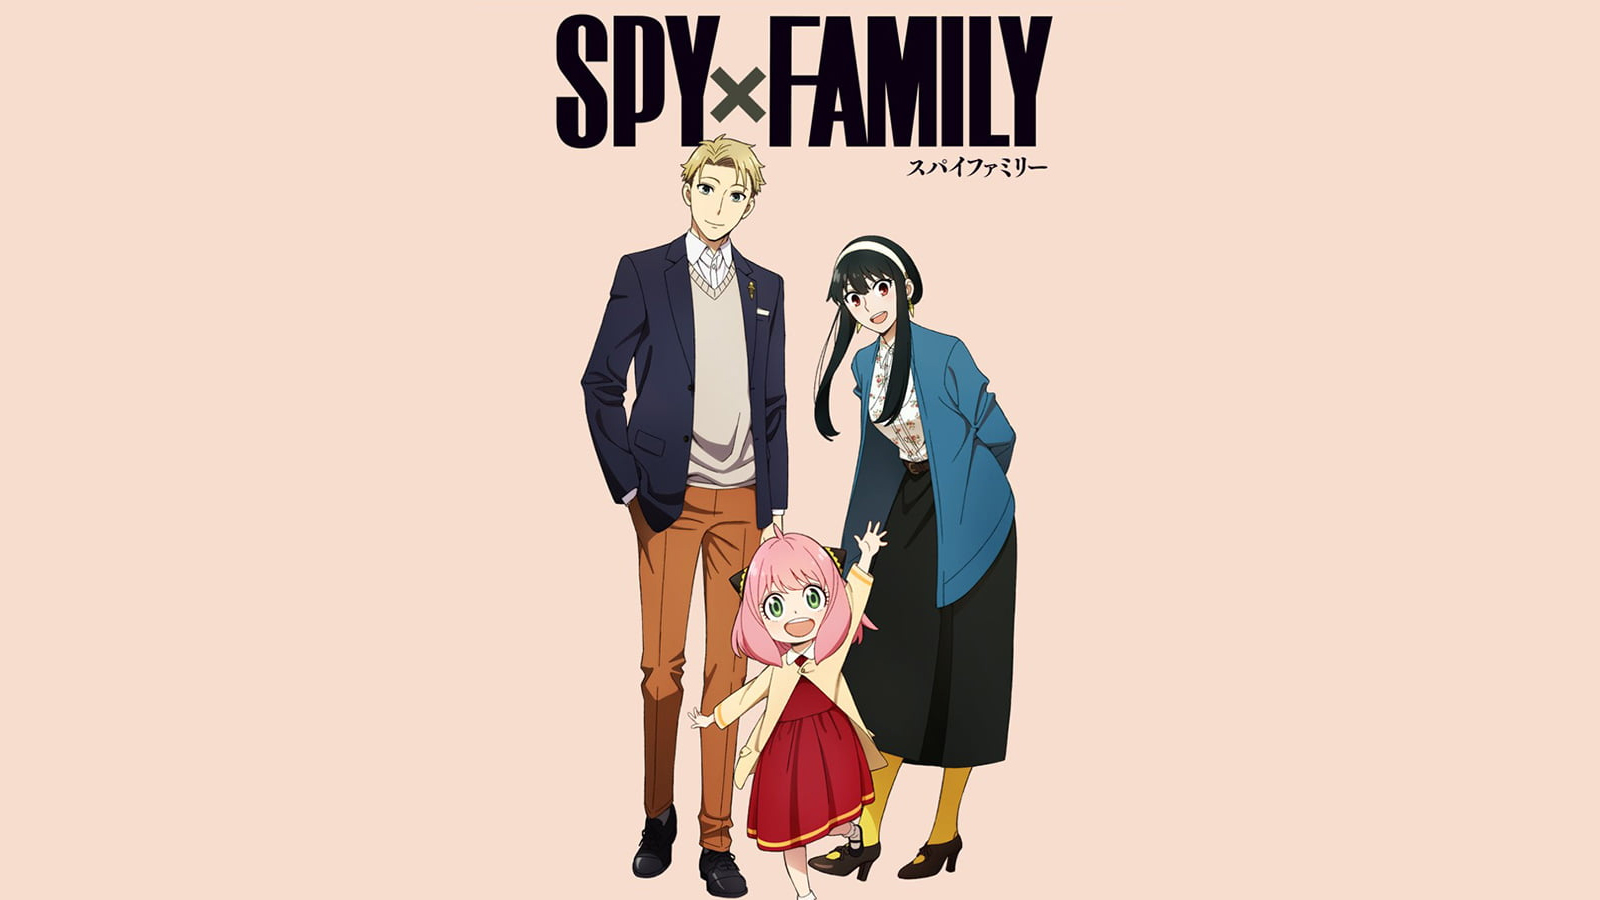 Spy x Family Season 2 Episode 3 Release Date and Time 